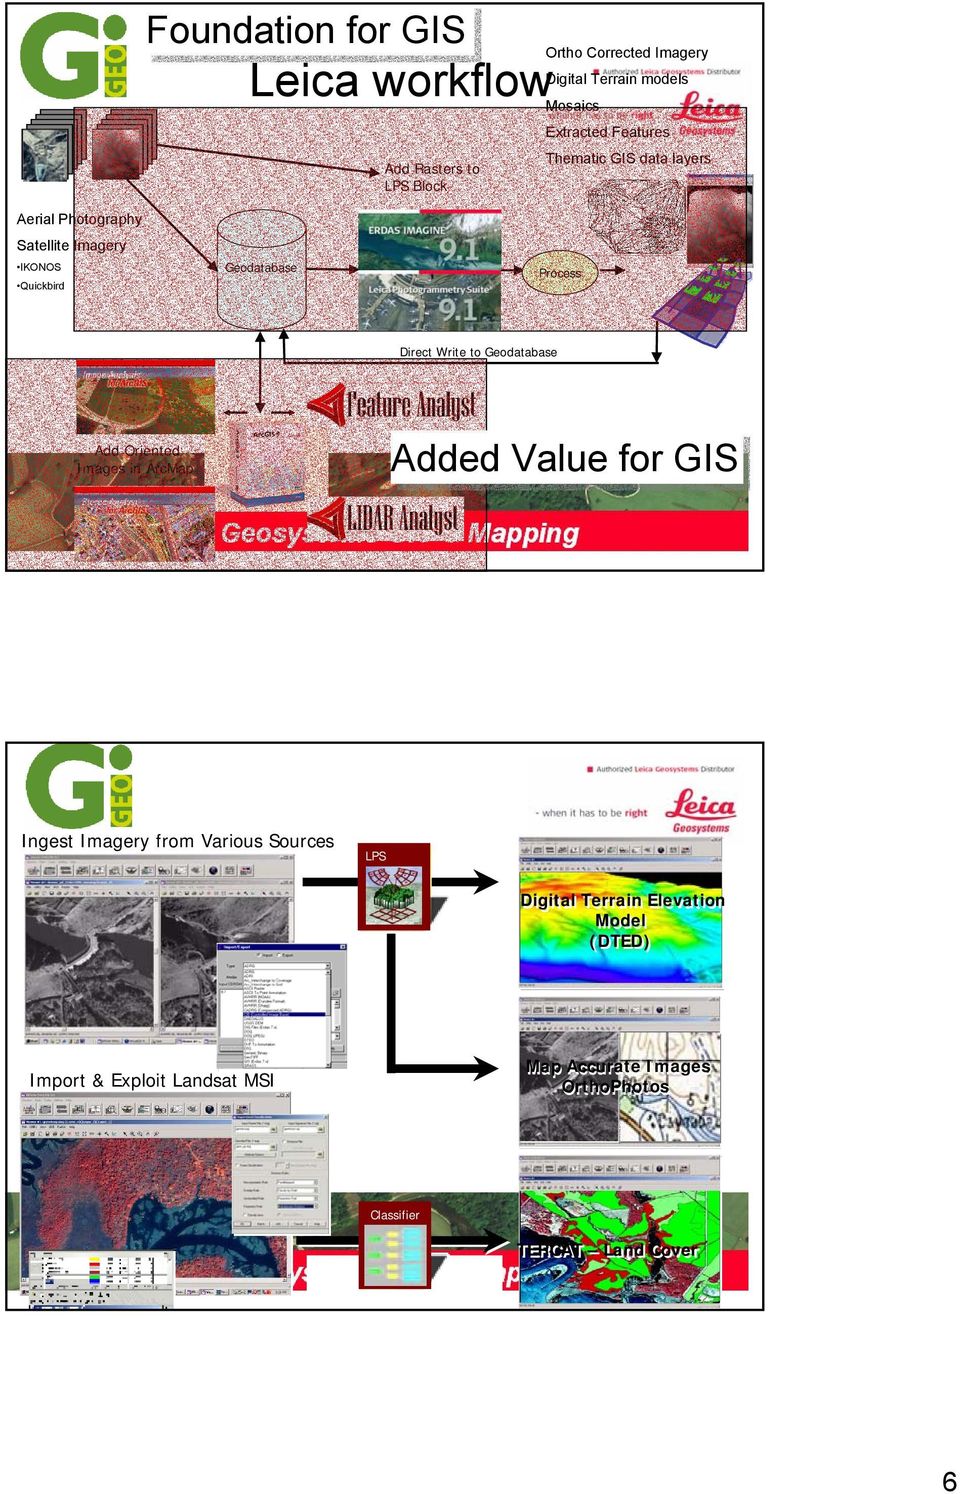 Direct Write to Geodatabase Add Oriented Images in ArcMap Added Value for GIS Ingest Imagery from Various Sources LPS